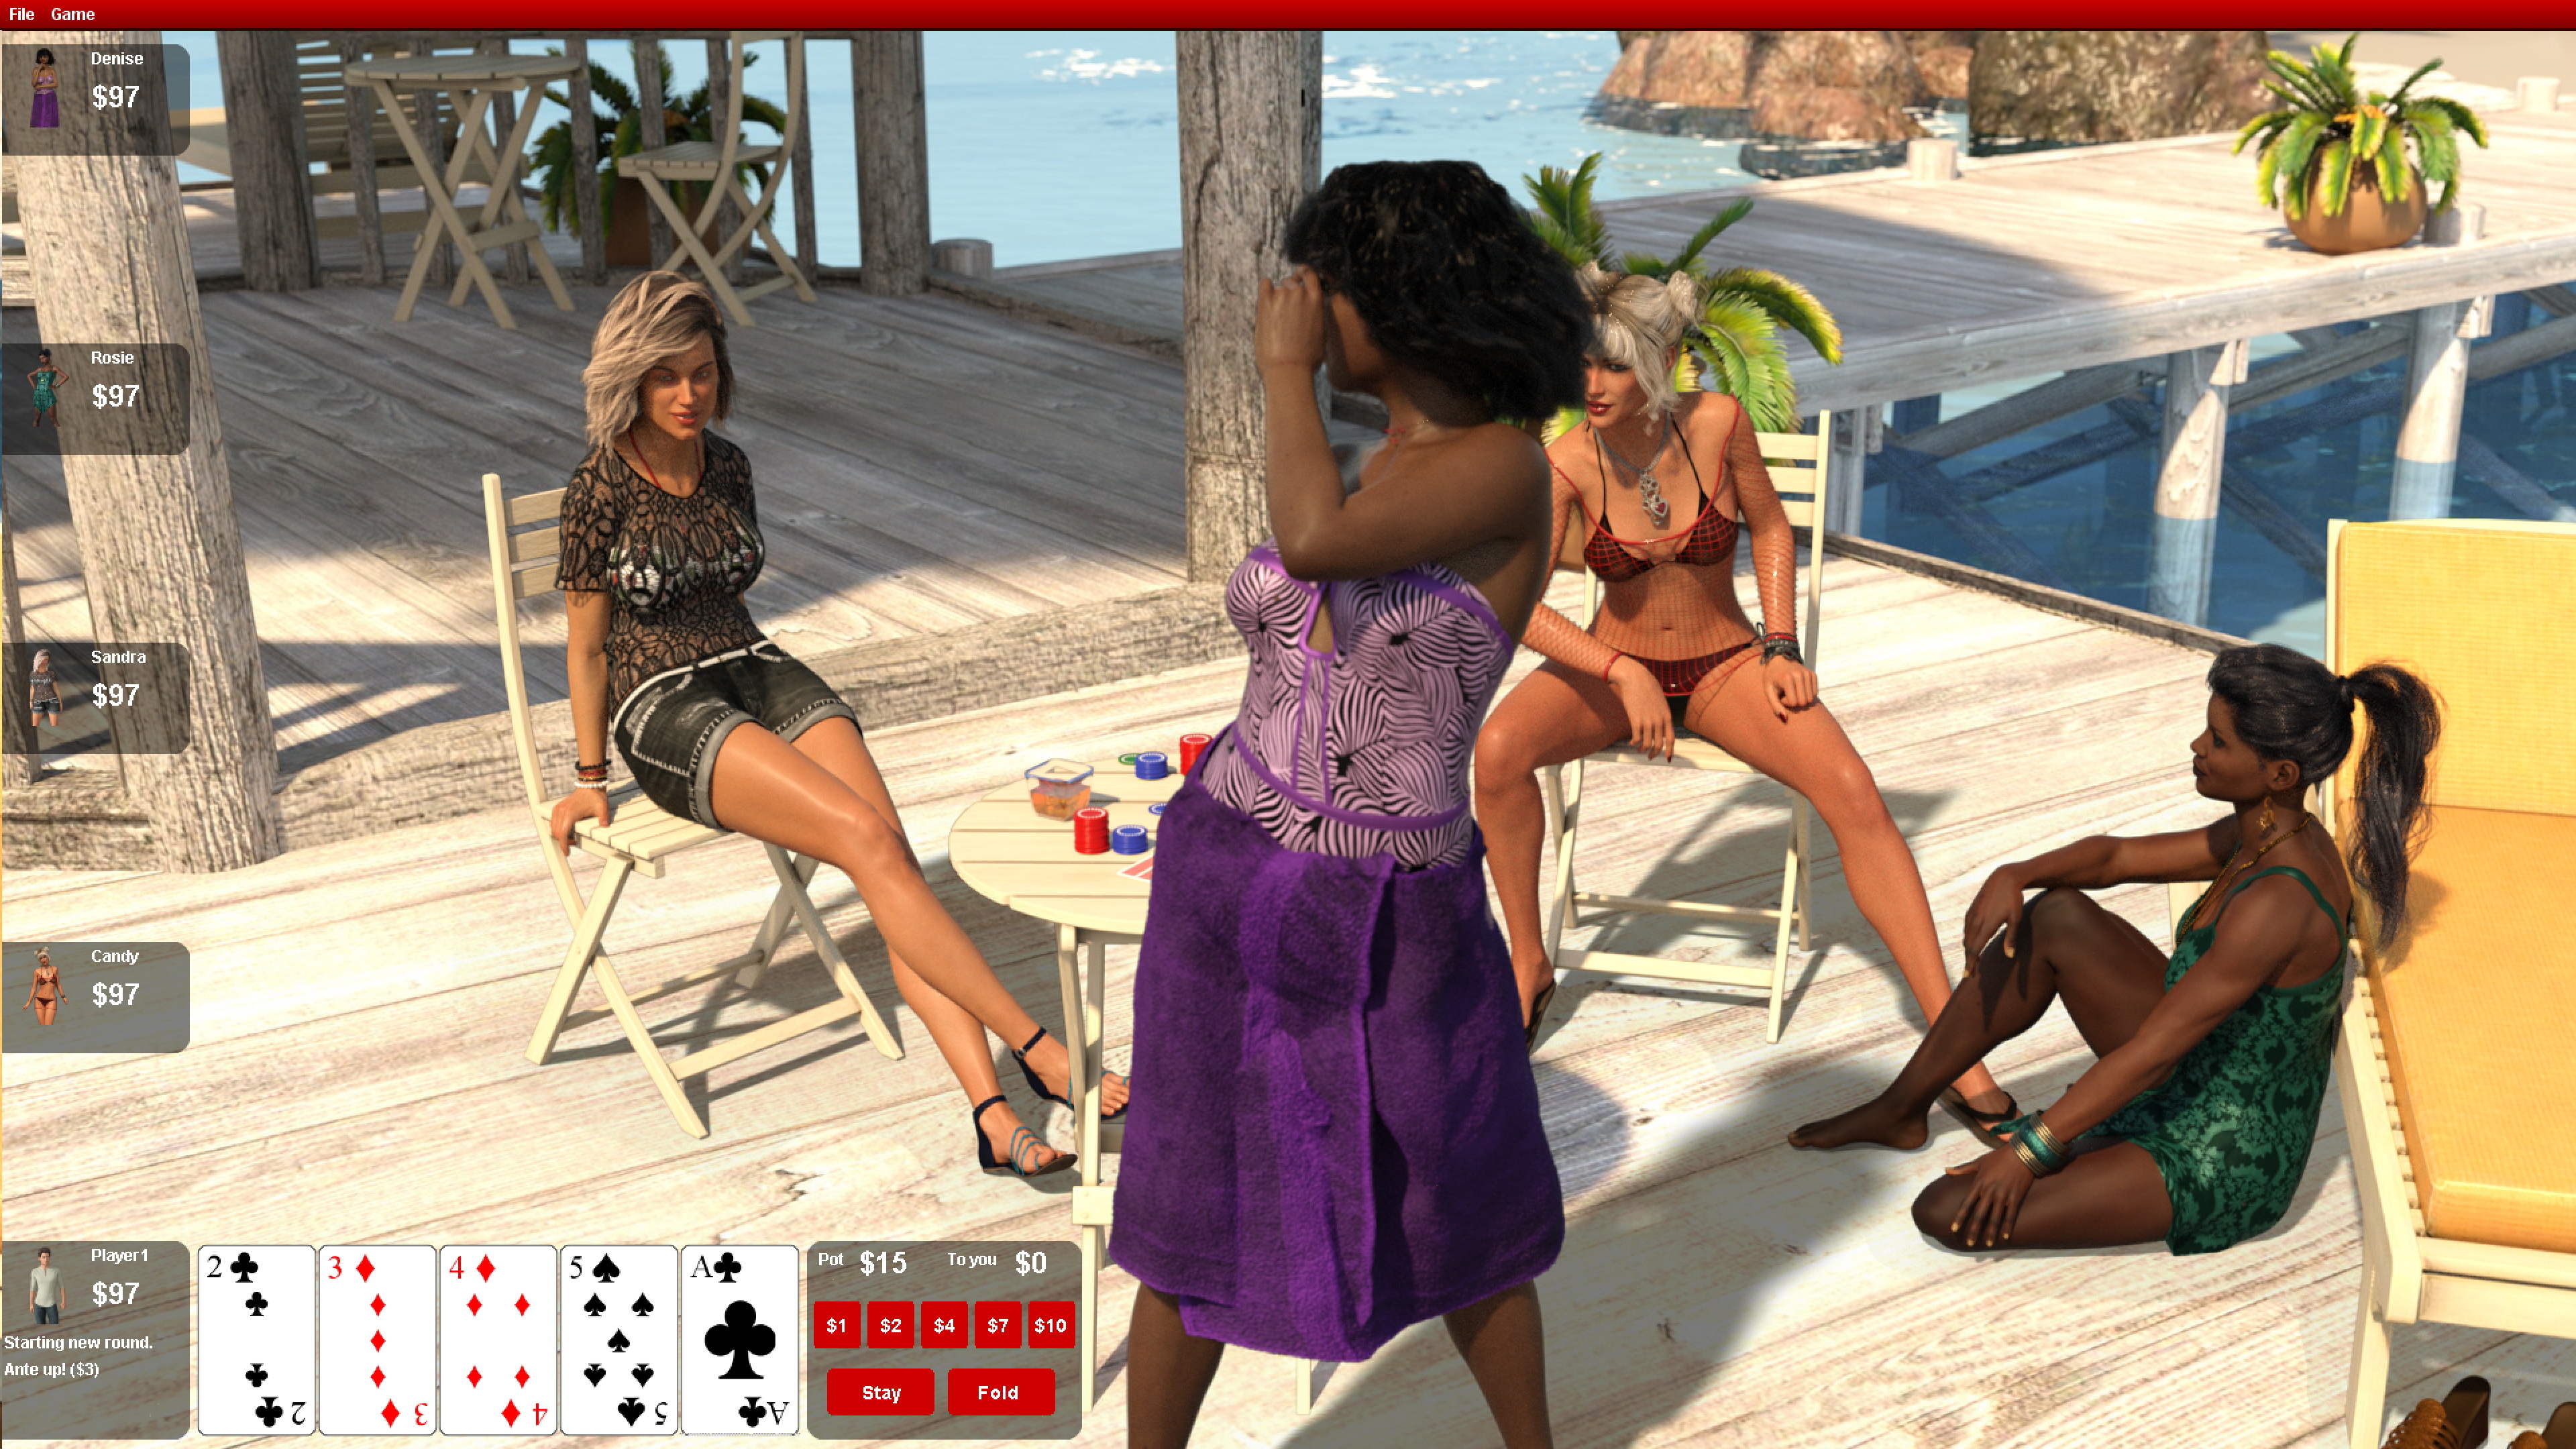 California Strip Poker 0.13: new outfit for Denise! - California Strip Poker  by Eldricus